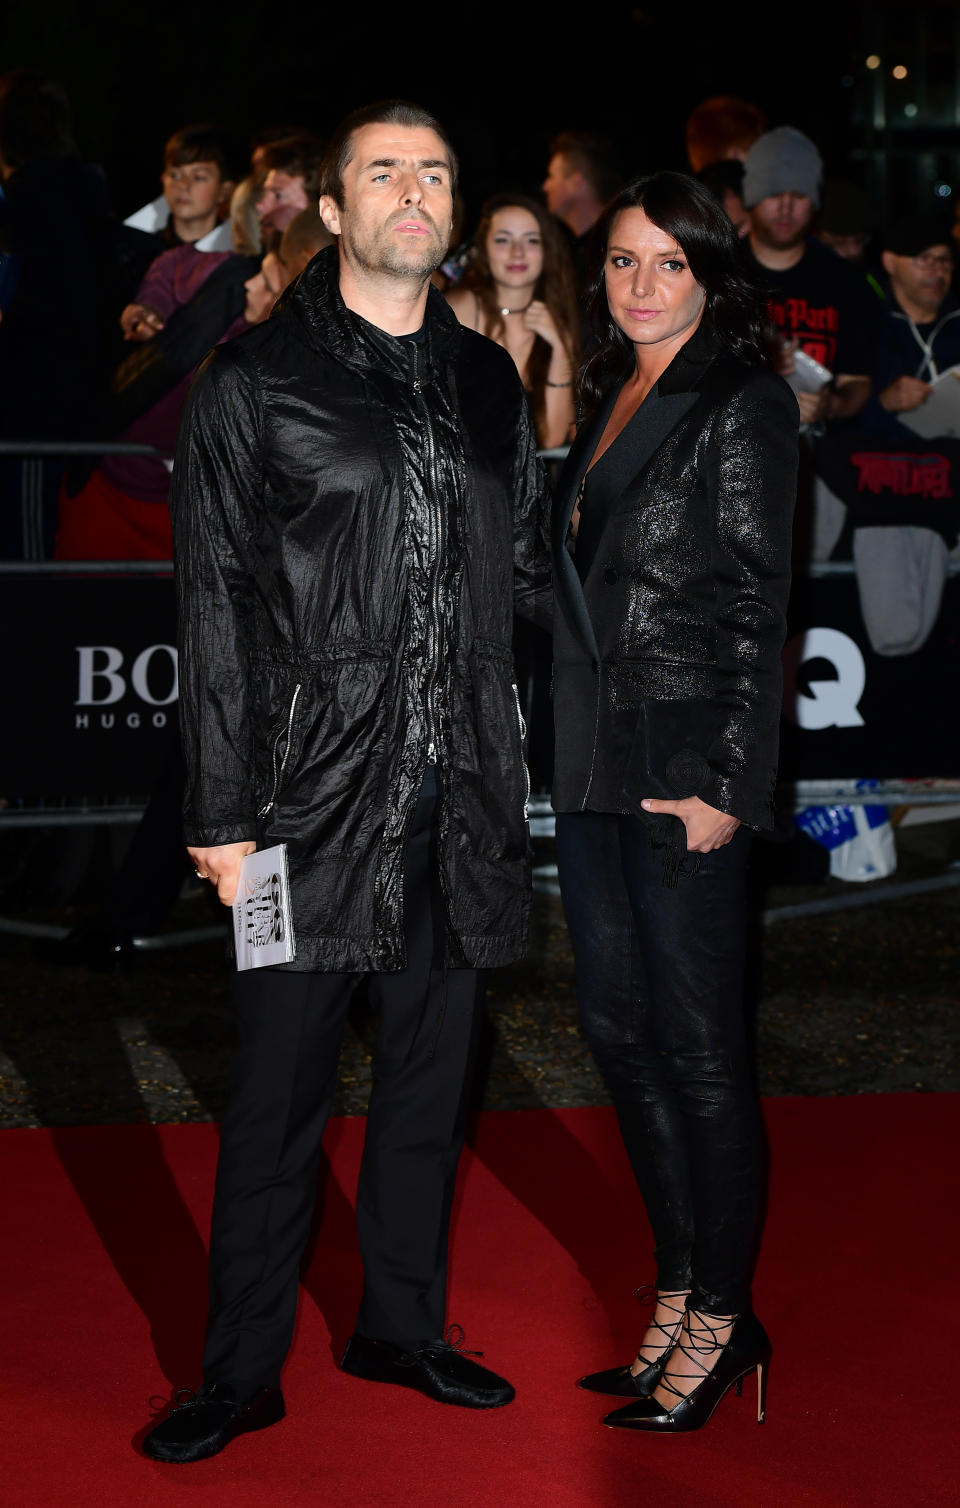 Liam Gallagher and Debbie Gwyther attending the GQ Men of the Year Awards 2017 held at the Tate Modern, London.